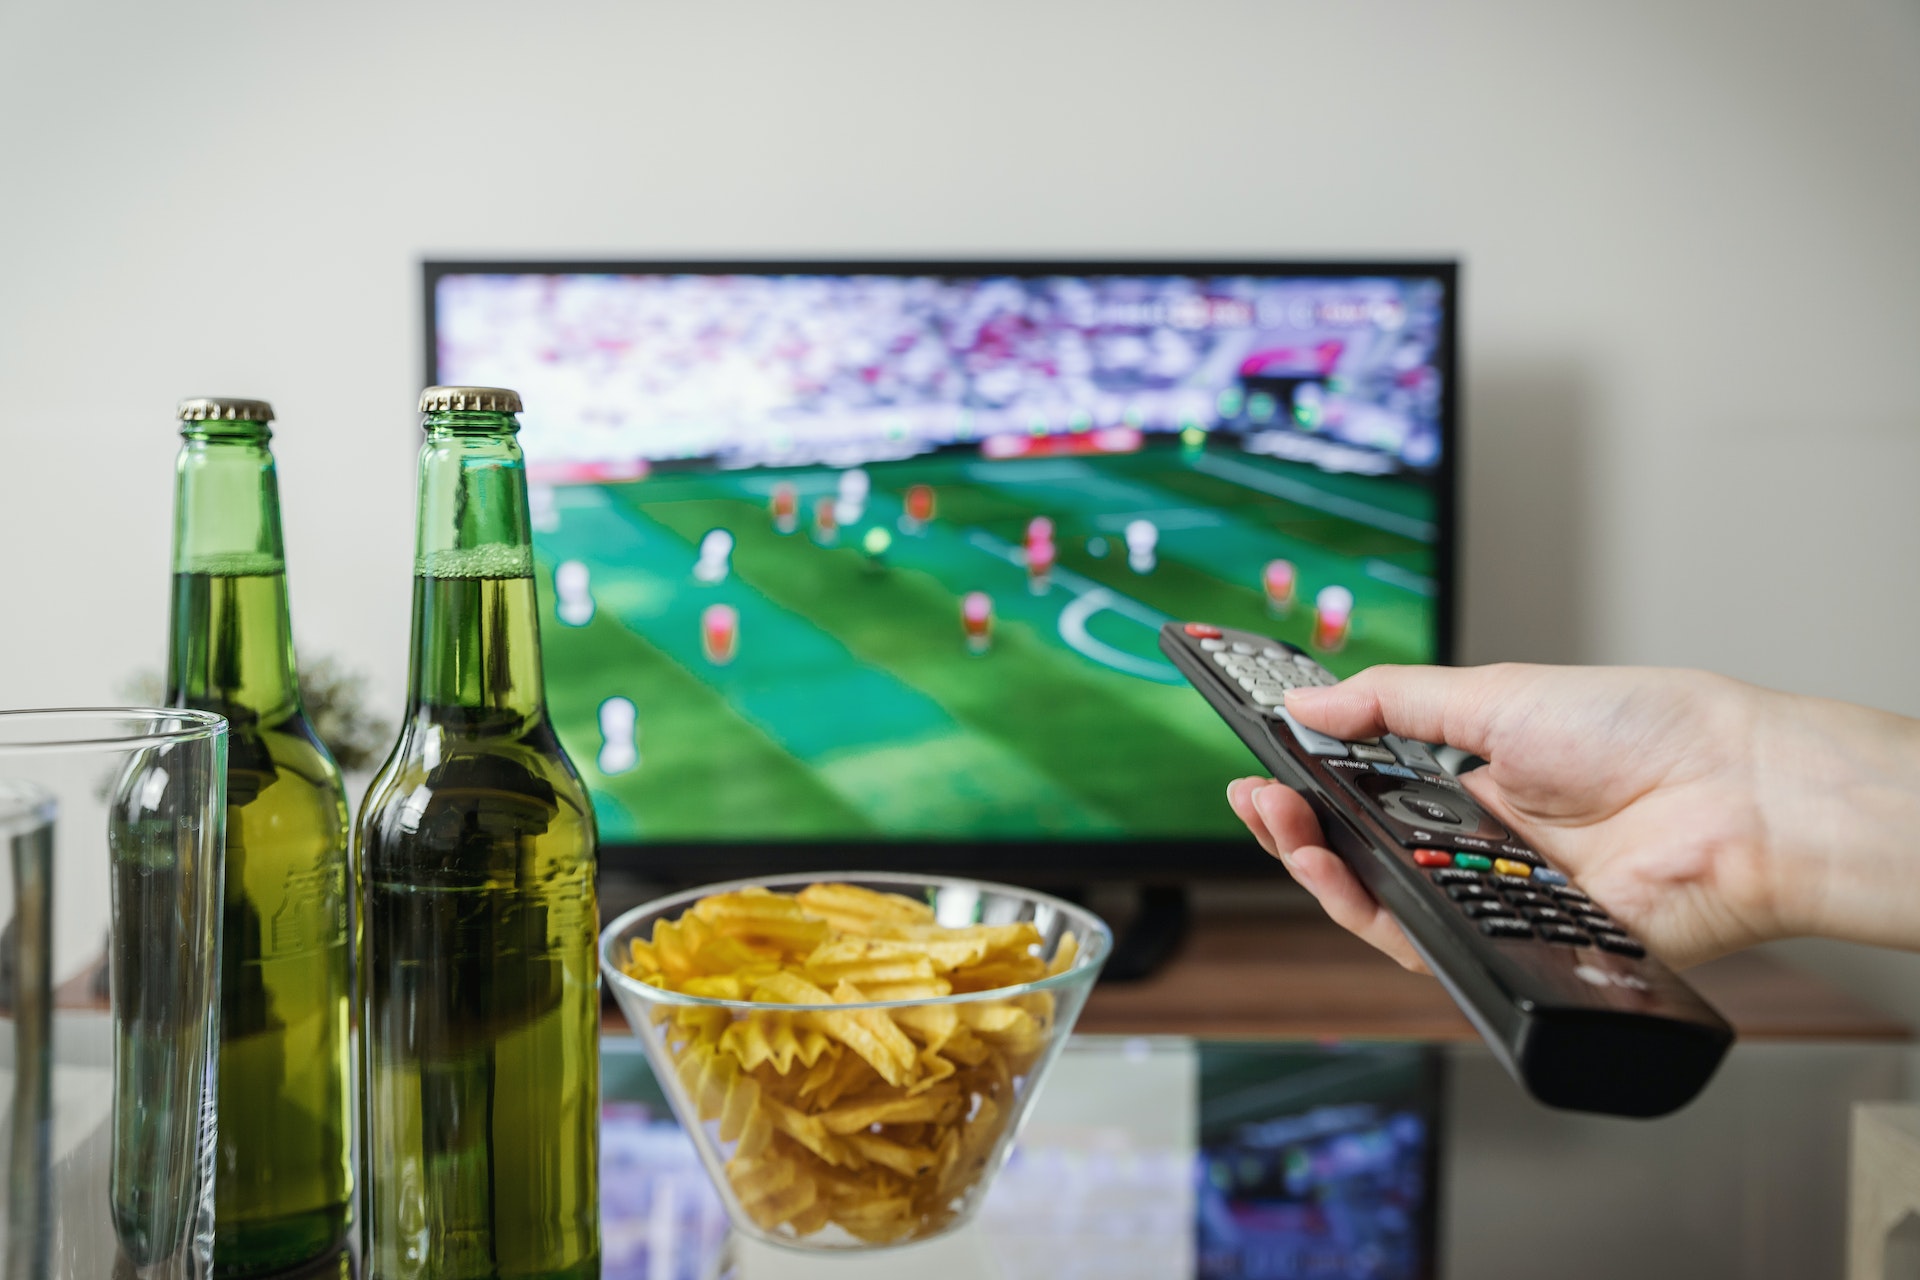 Football match on TV screen while a remote controller in hand and two carbonated drink bottles with glass are also present on table.